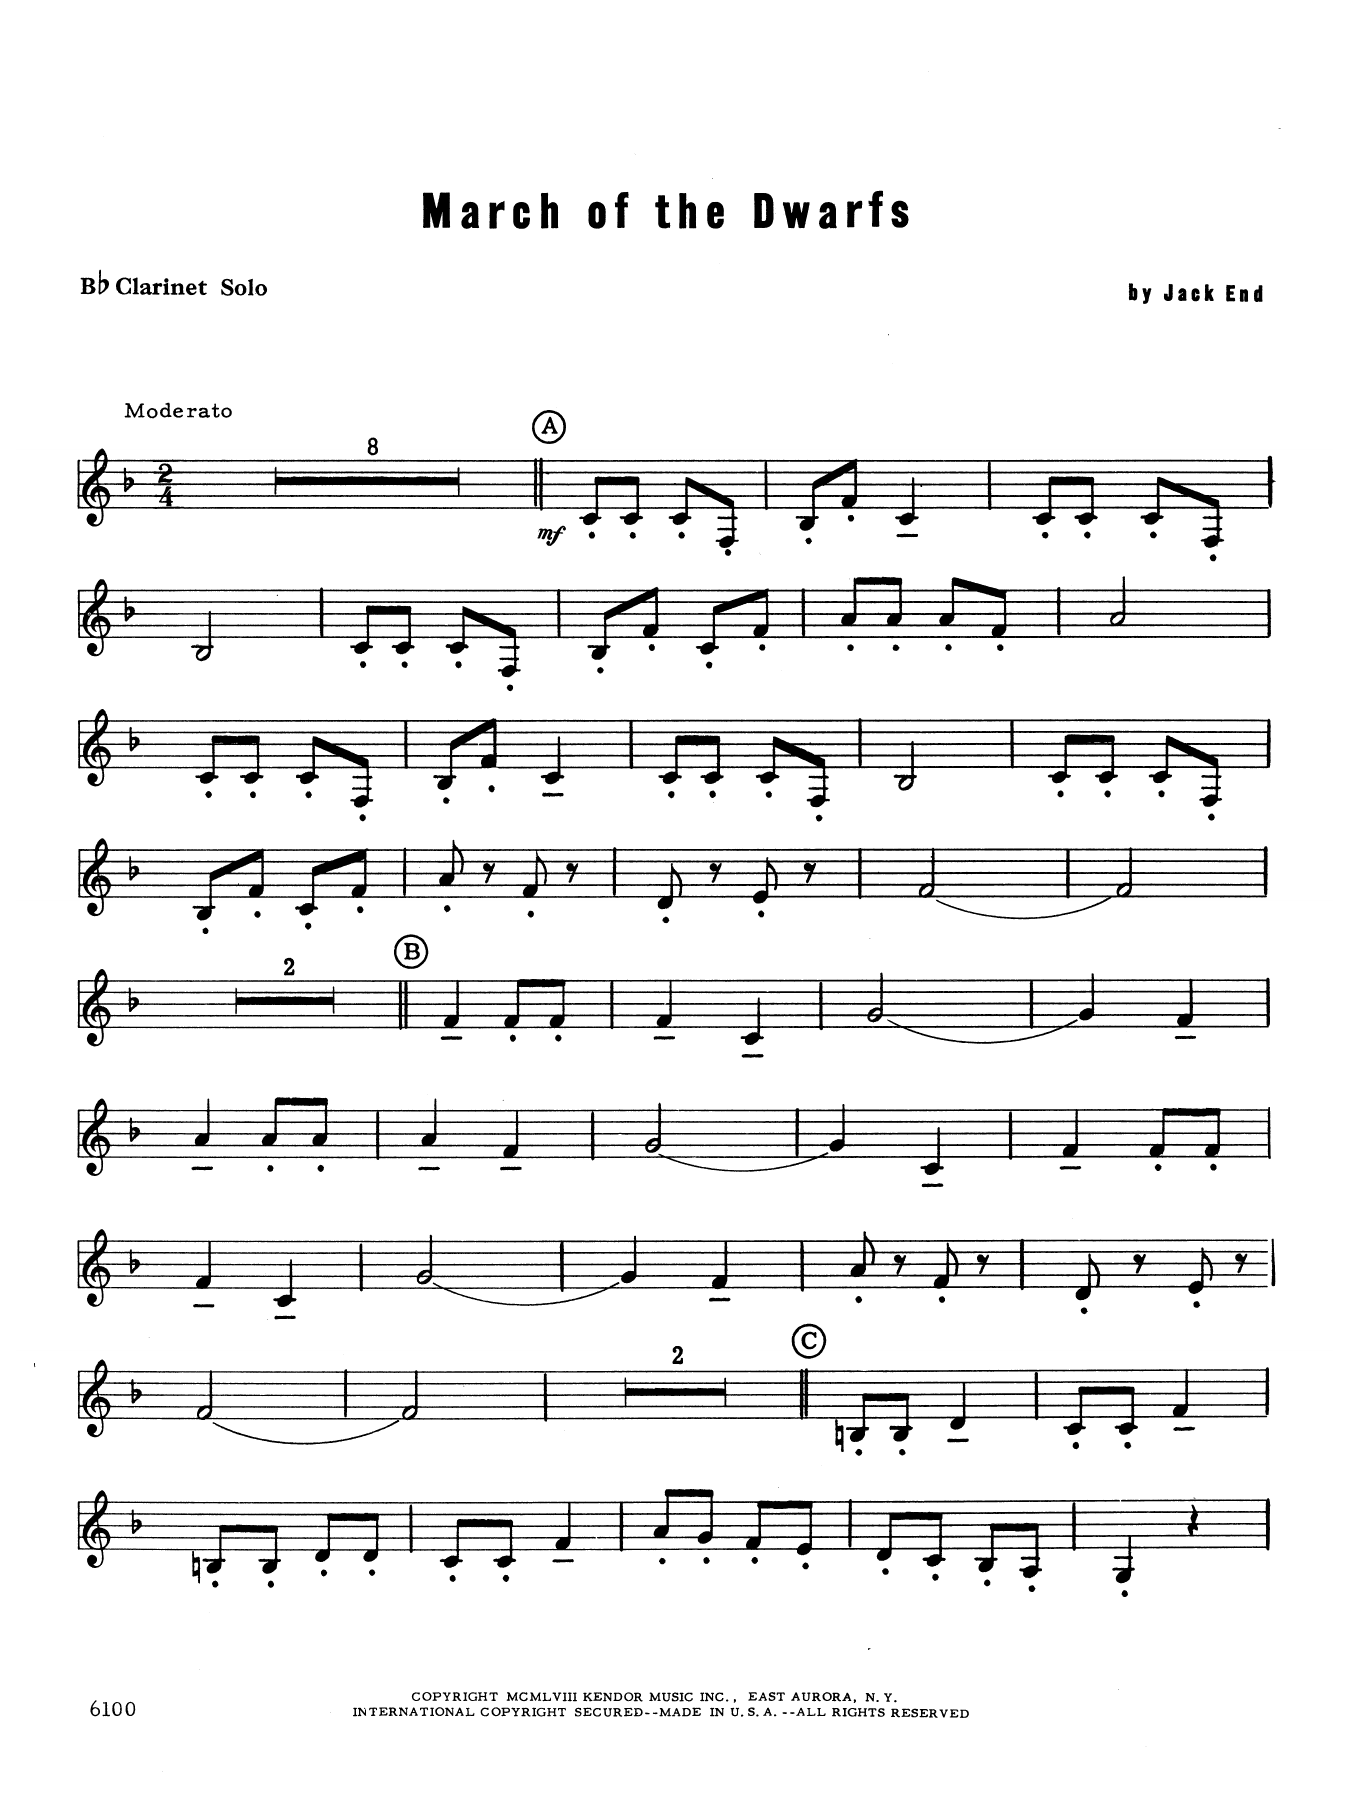 Download Jack End March of the Dwarfs - Bb Clarinet Sheet Music